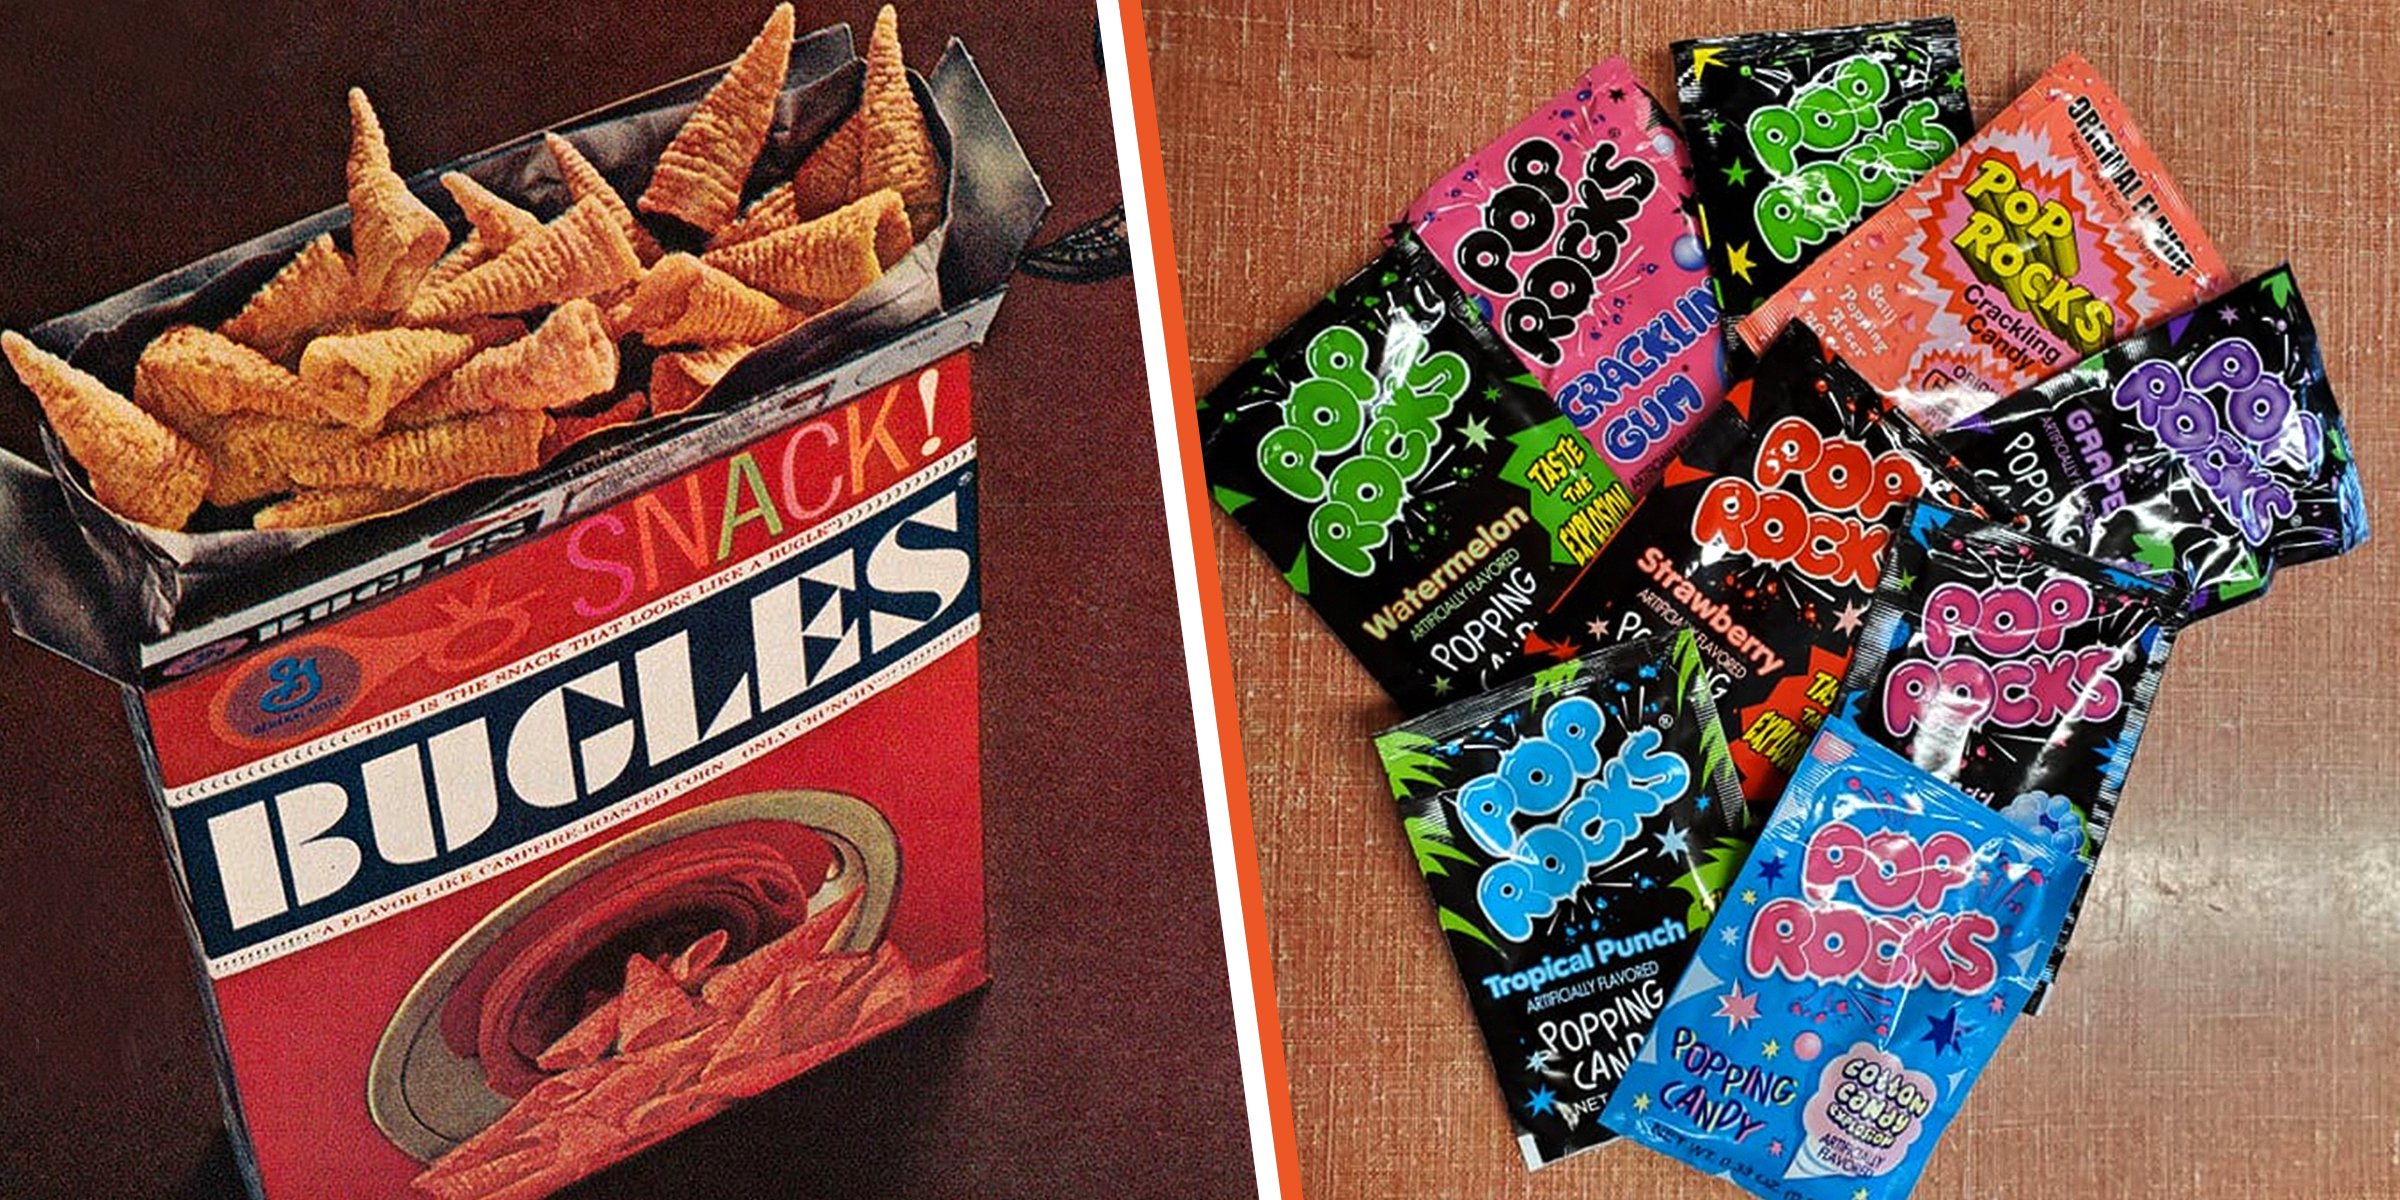 Snacks from the 60s, 70s and 80s | Source: facebook.com/lookingglass3 | facebook.com/Terry Dean Patterson 